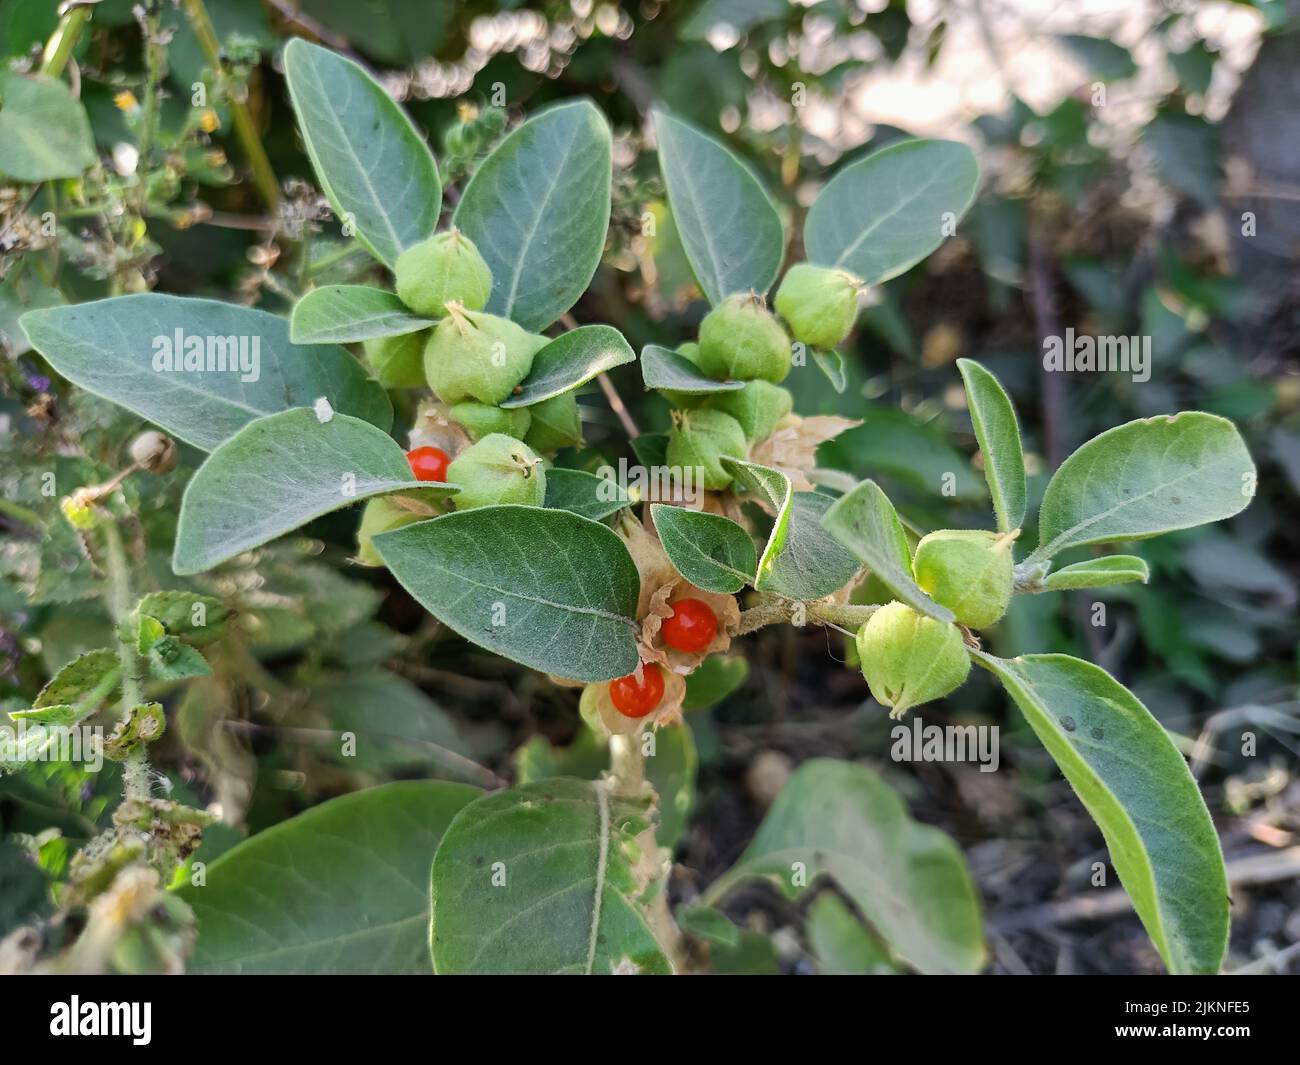 Ashwagandha plant or winter cherry plant or withania somnifera plant is used to ayurvedic medicinal plants plant in india Stock Photo